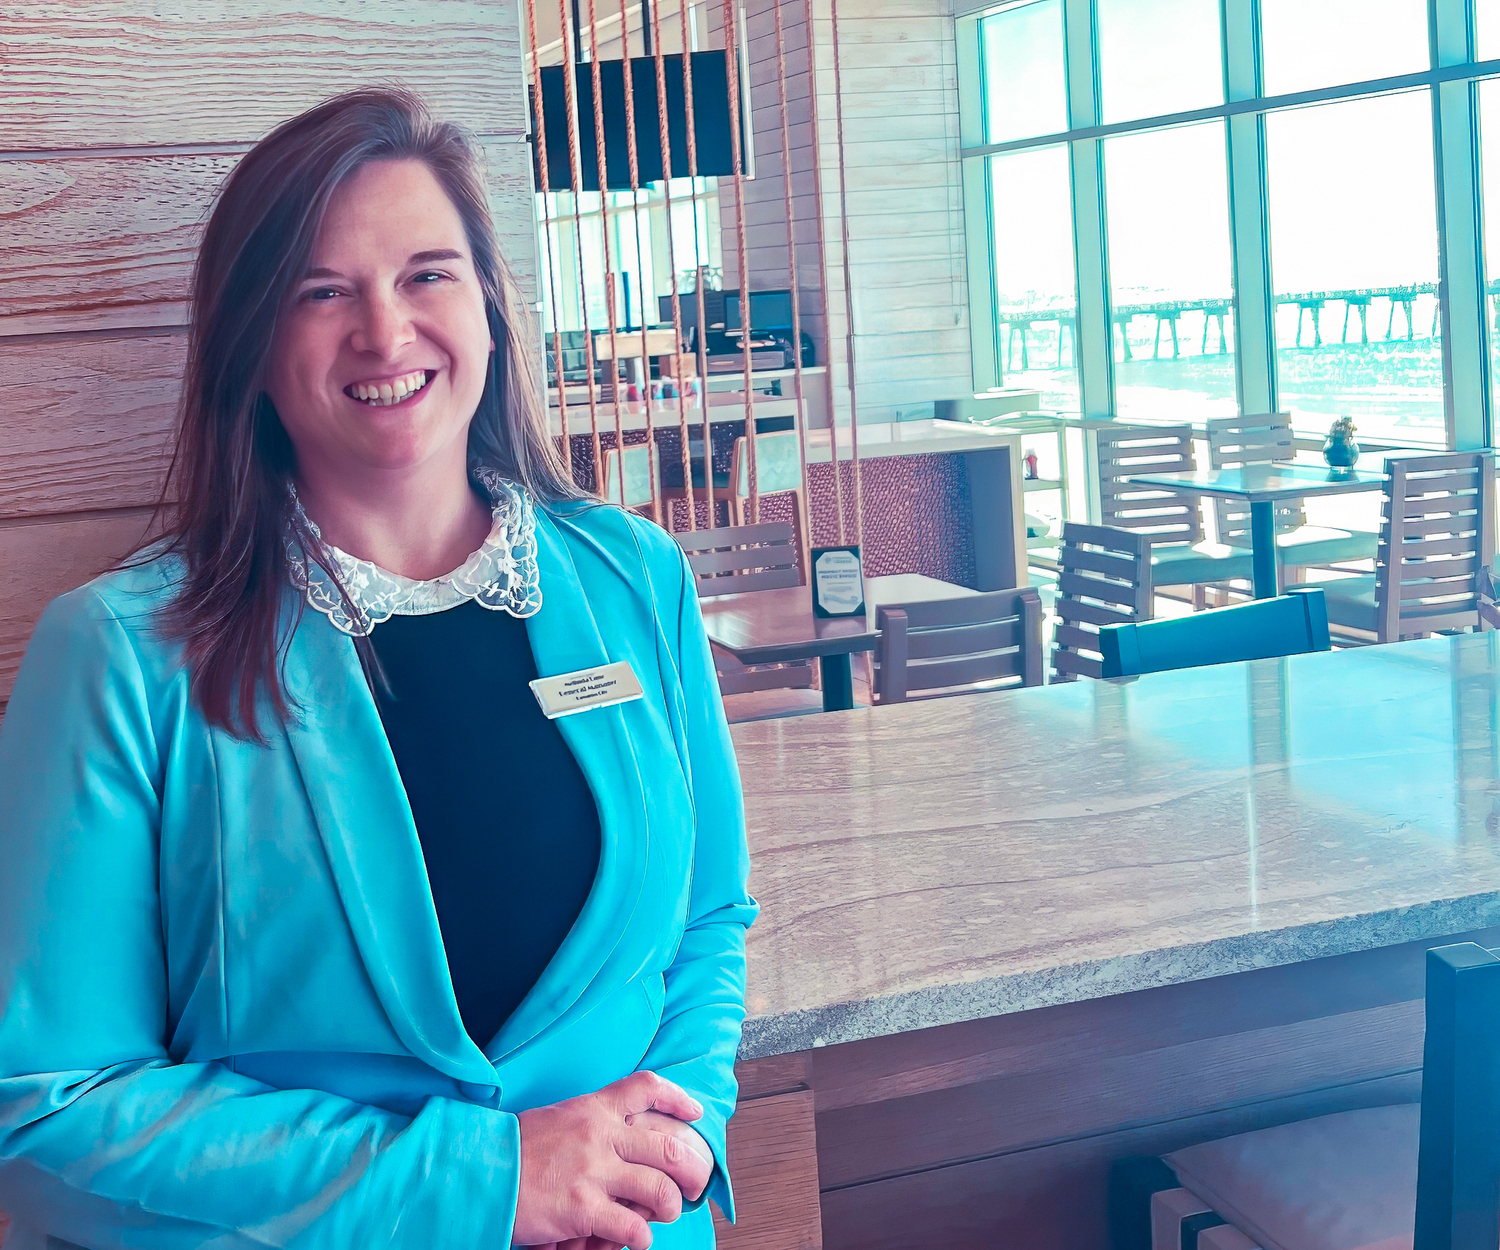 Melinda Lane is a ‘GM to Watch’ at SpringHill Suites Panama City Beach